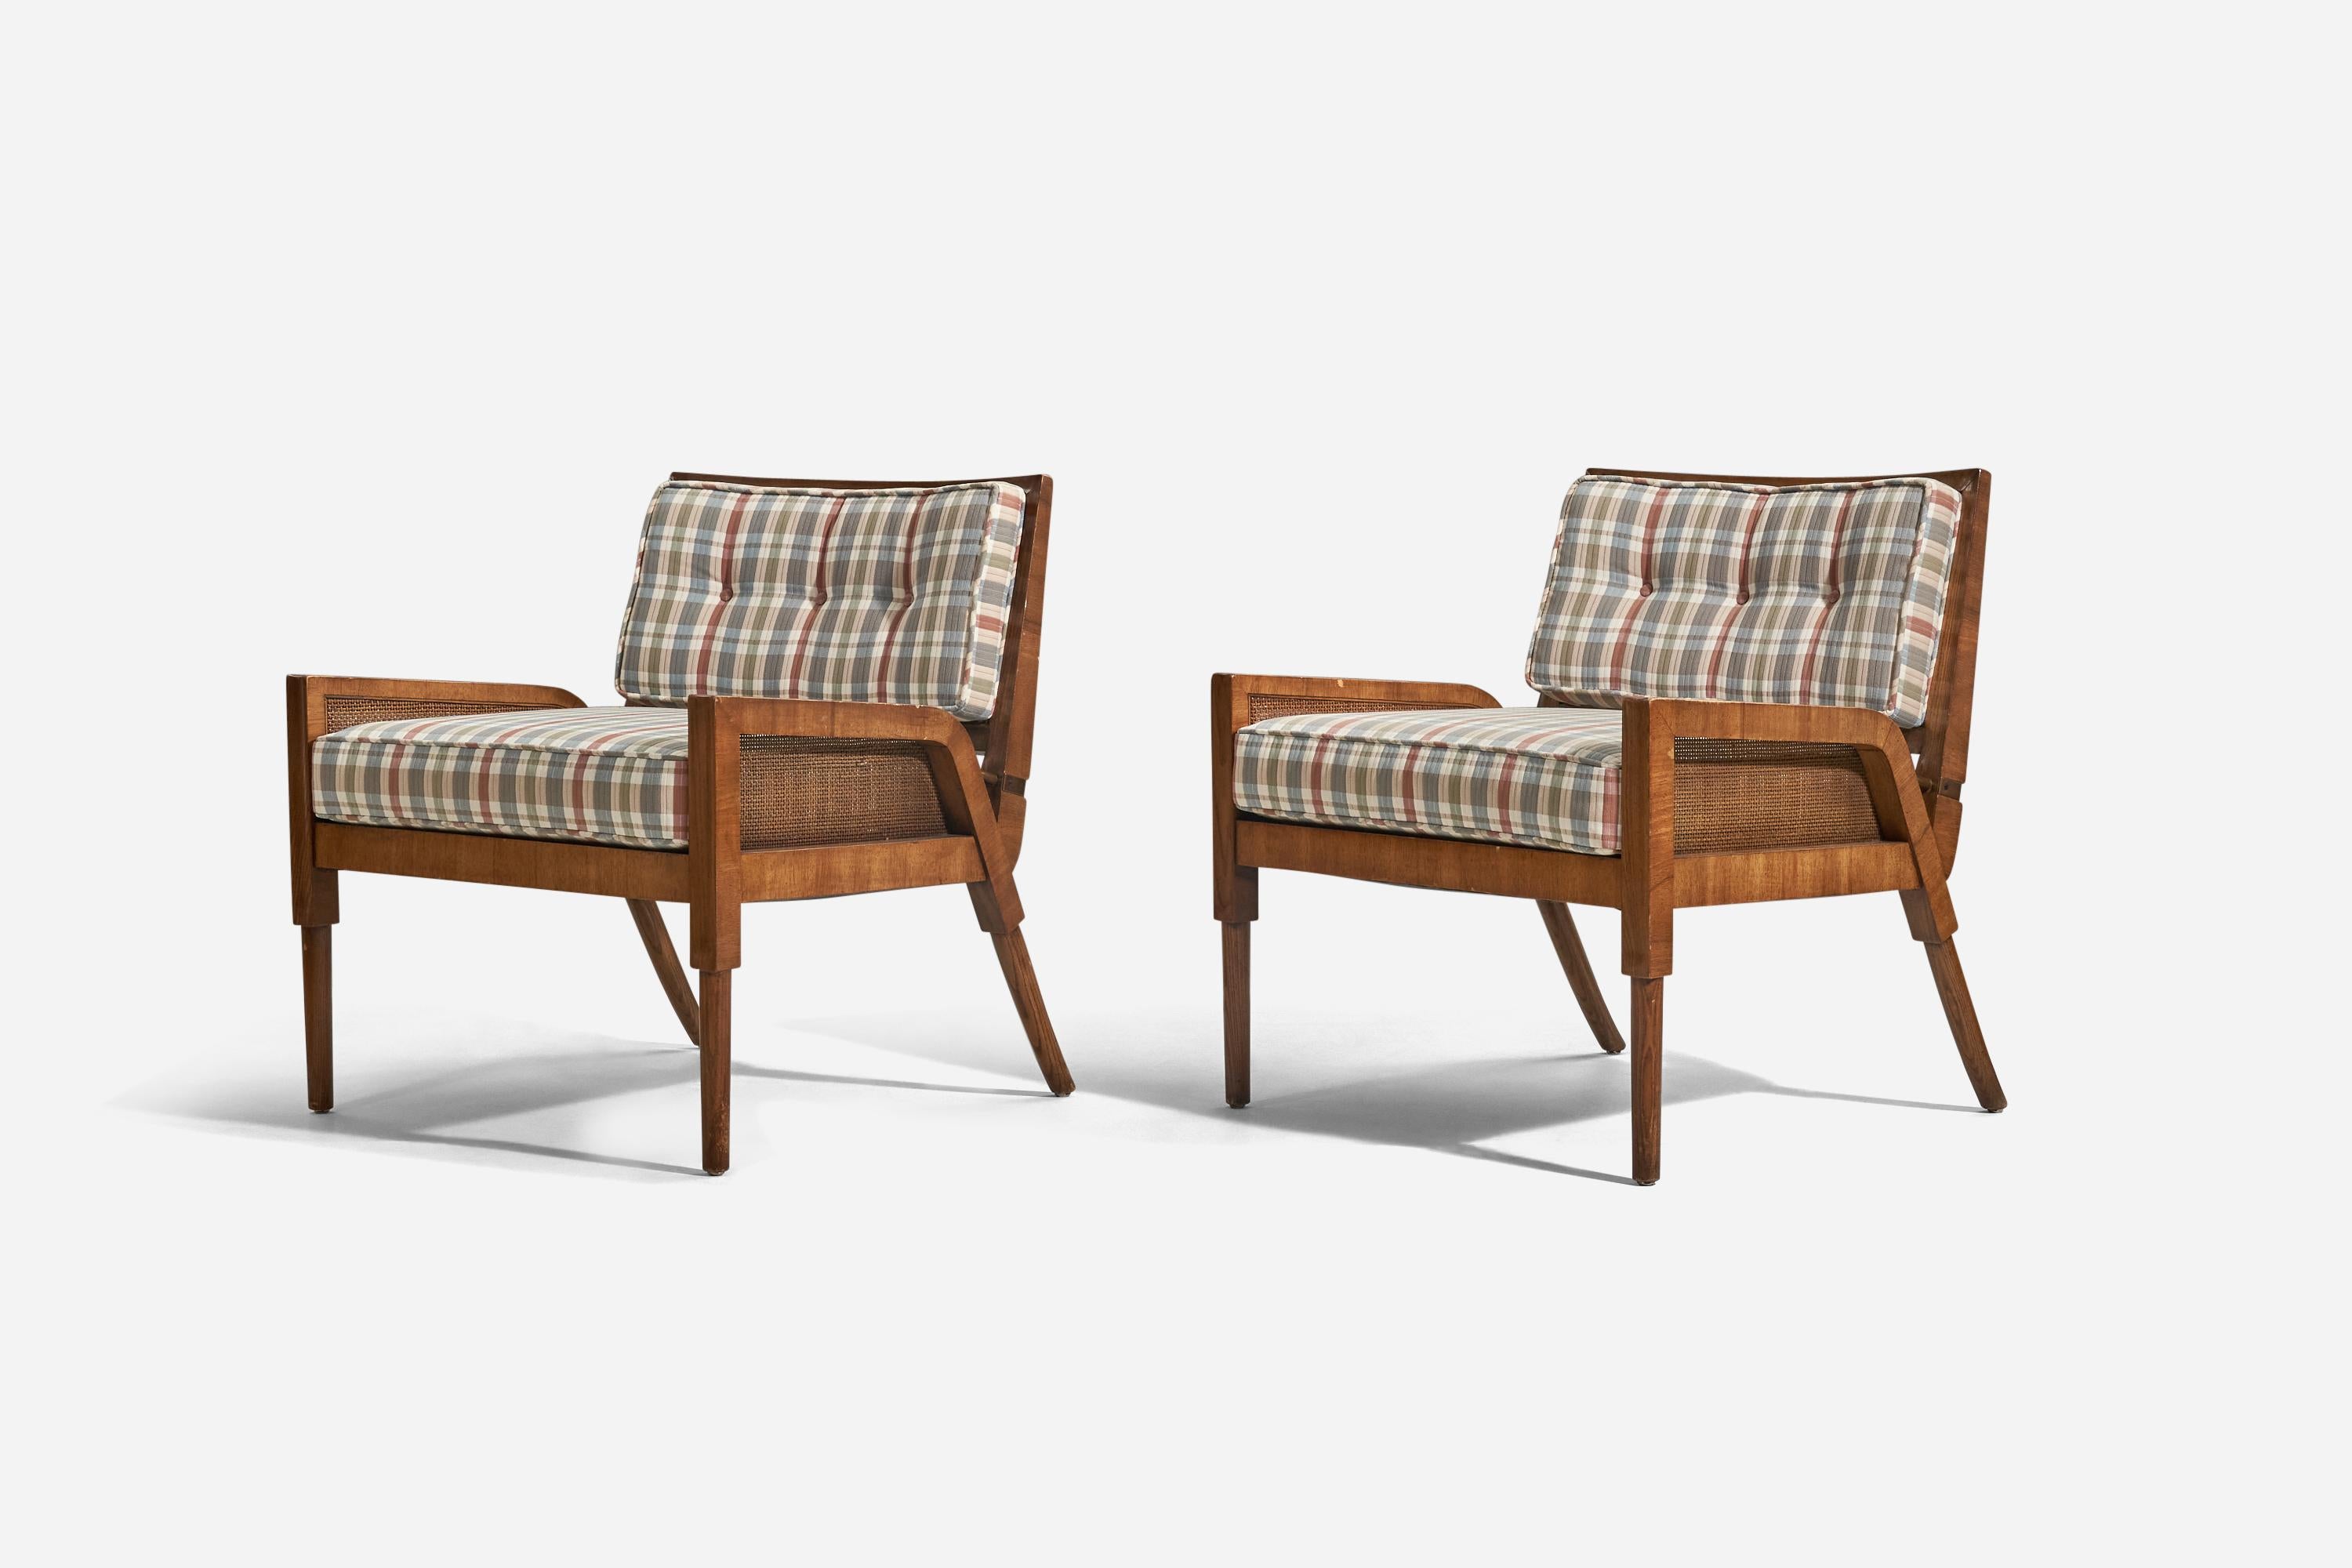 Mid-Century Modern American Designer, Lounge Chairs, Oak, Fabric, Cane, United States, 1950s For Sale